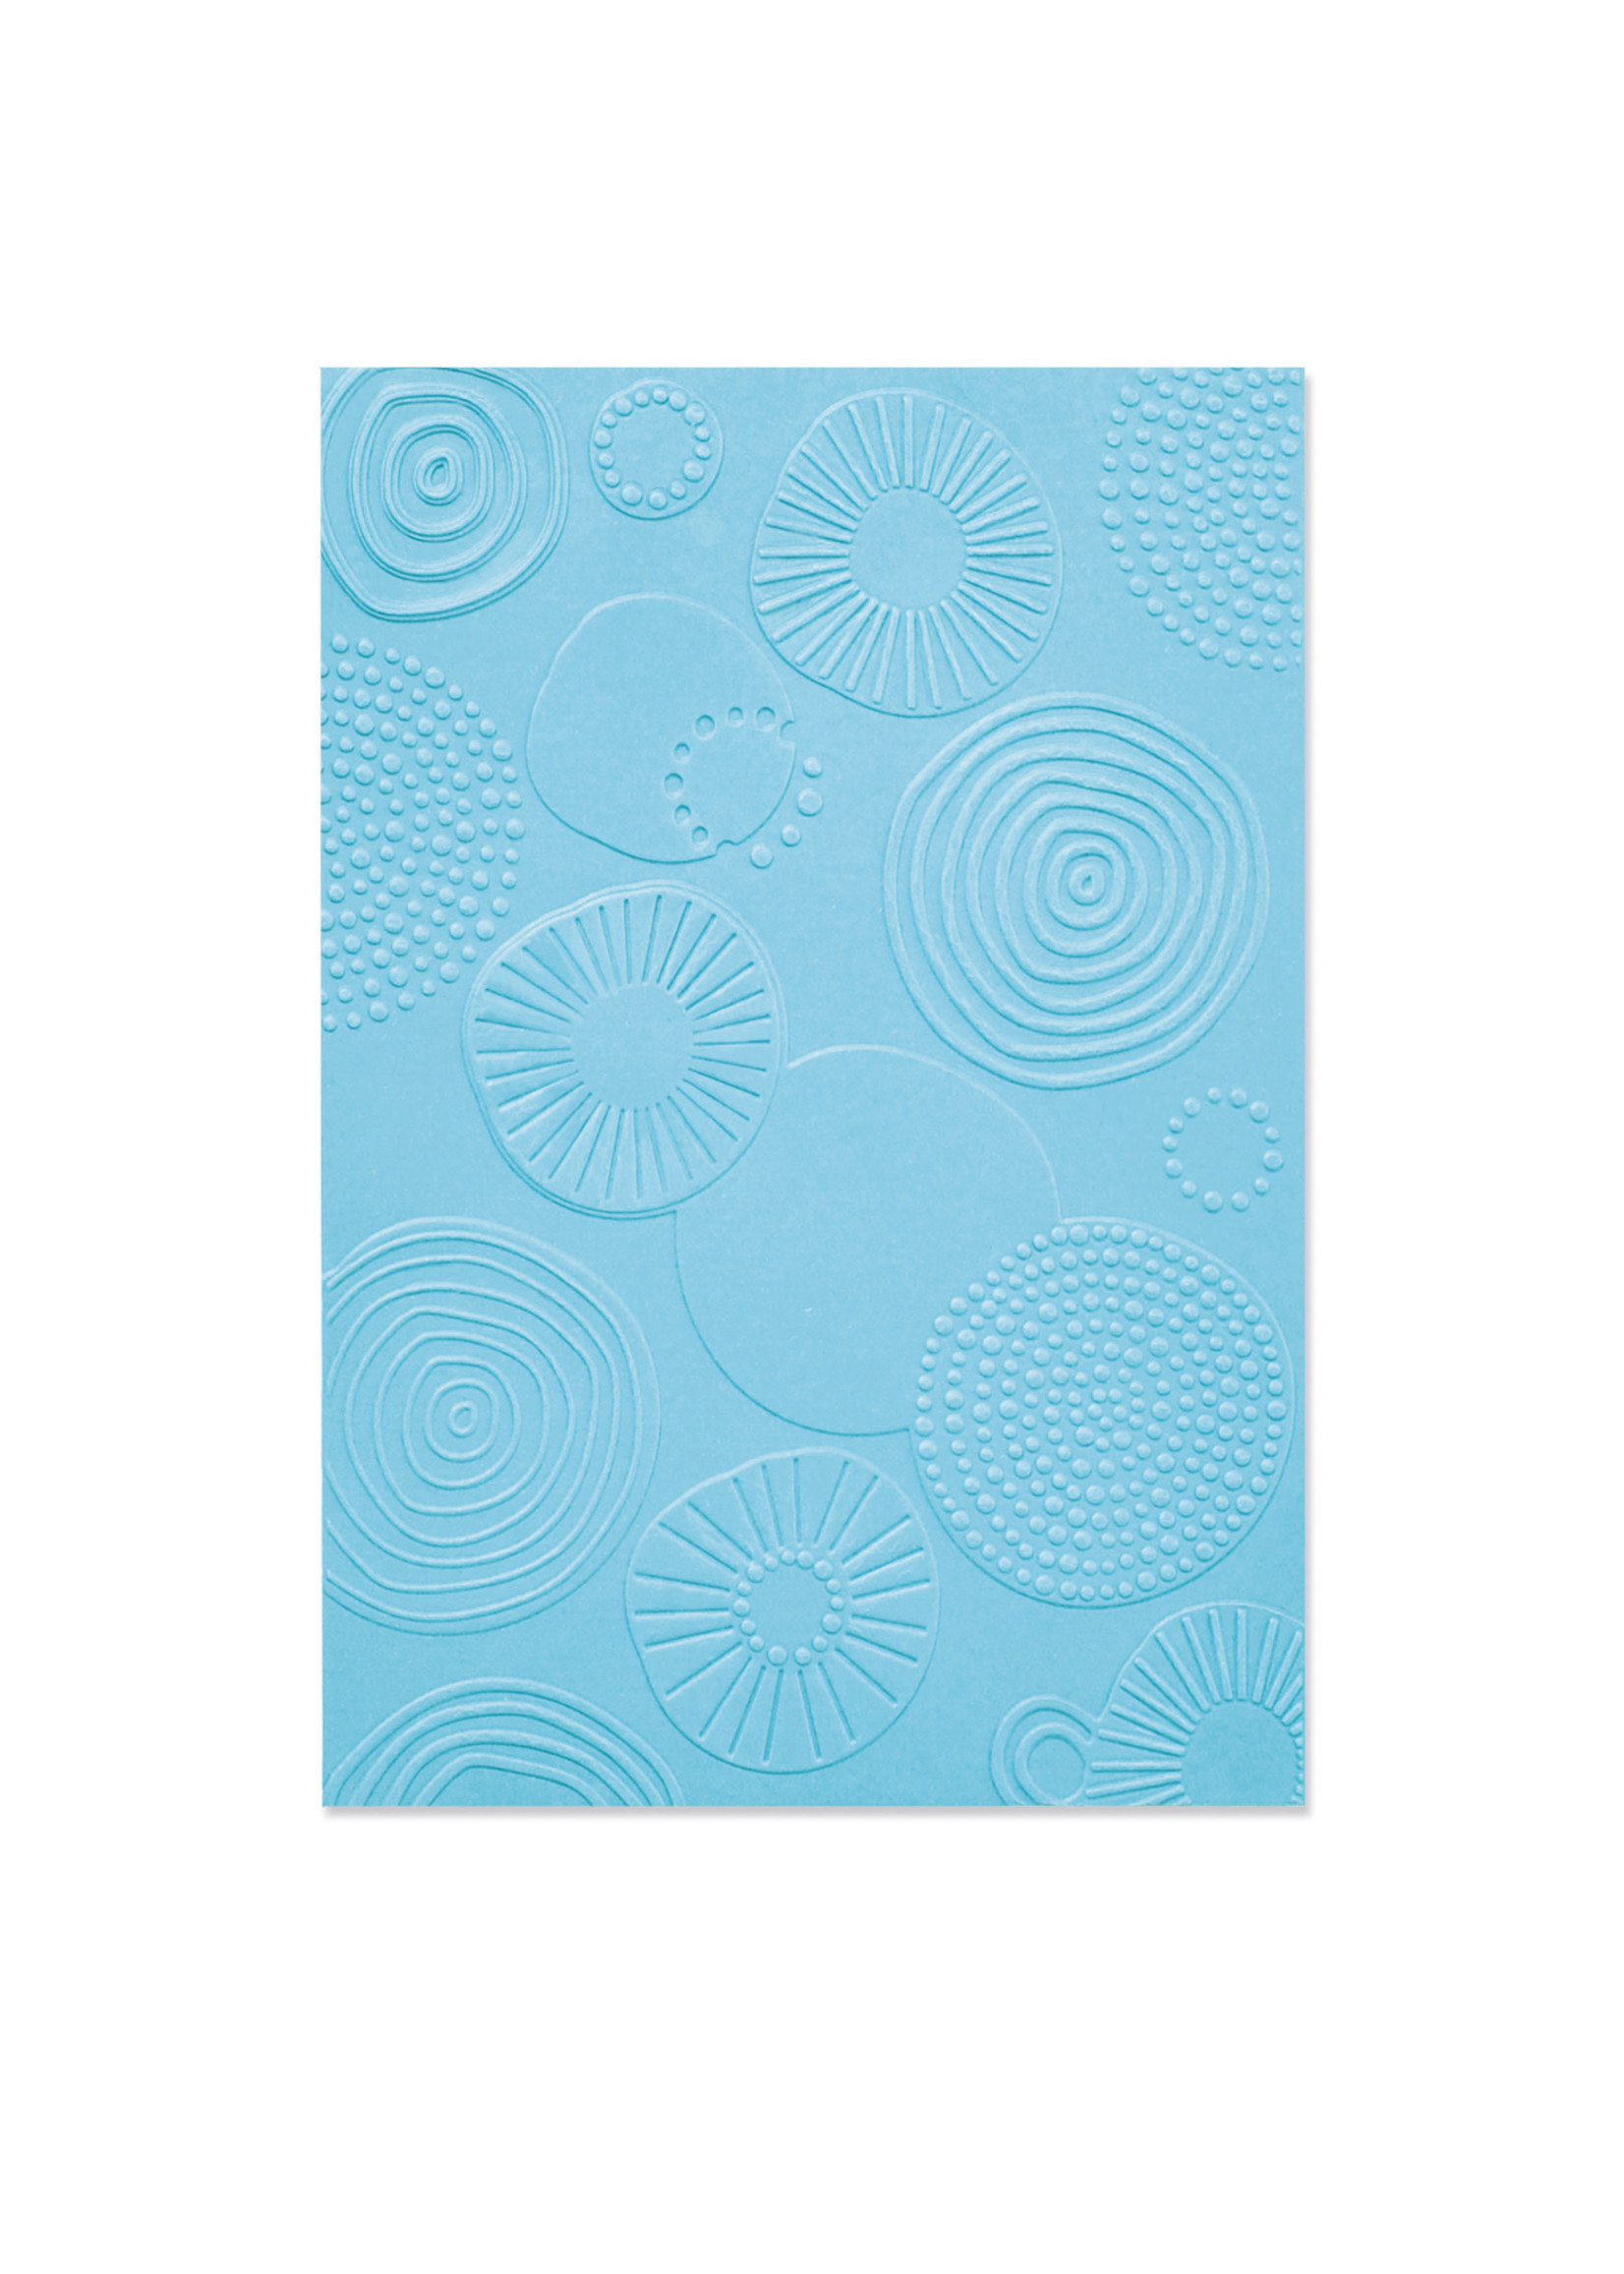 Sizzix Abstract Rounds Multi-Level Textured Impressions Embossing Folder